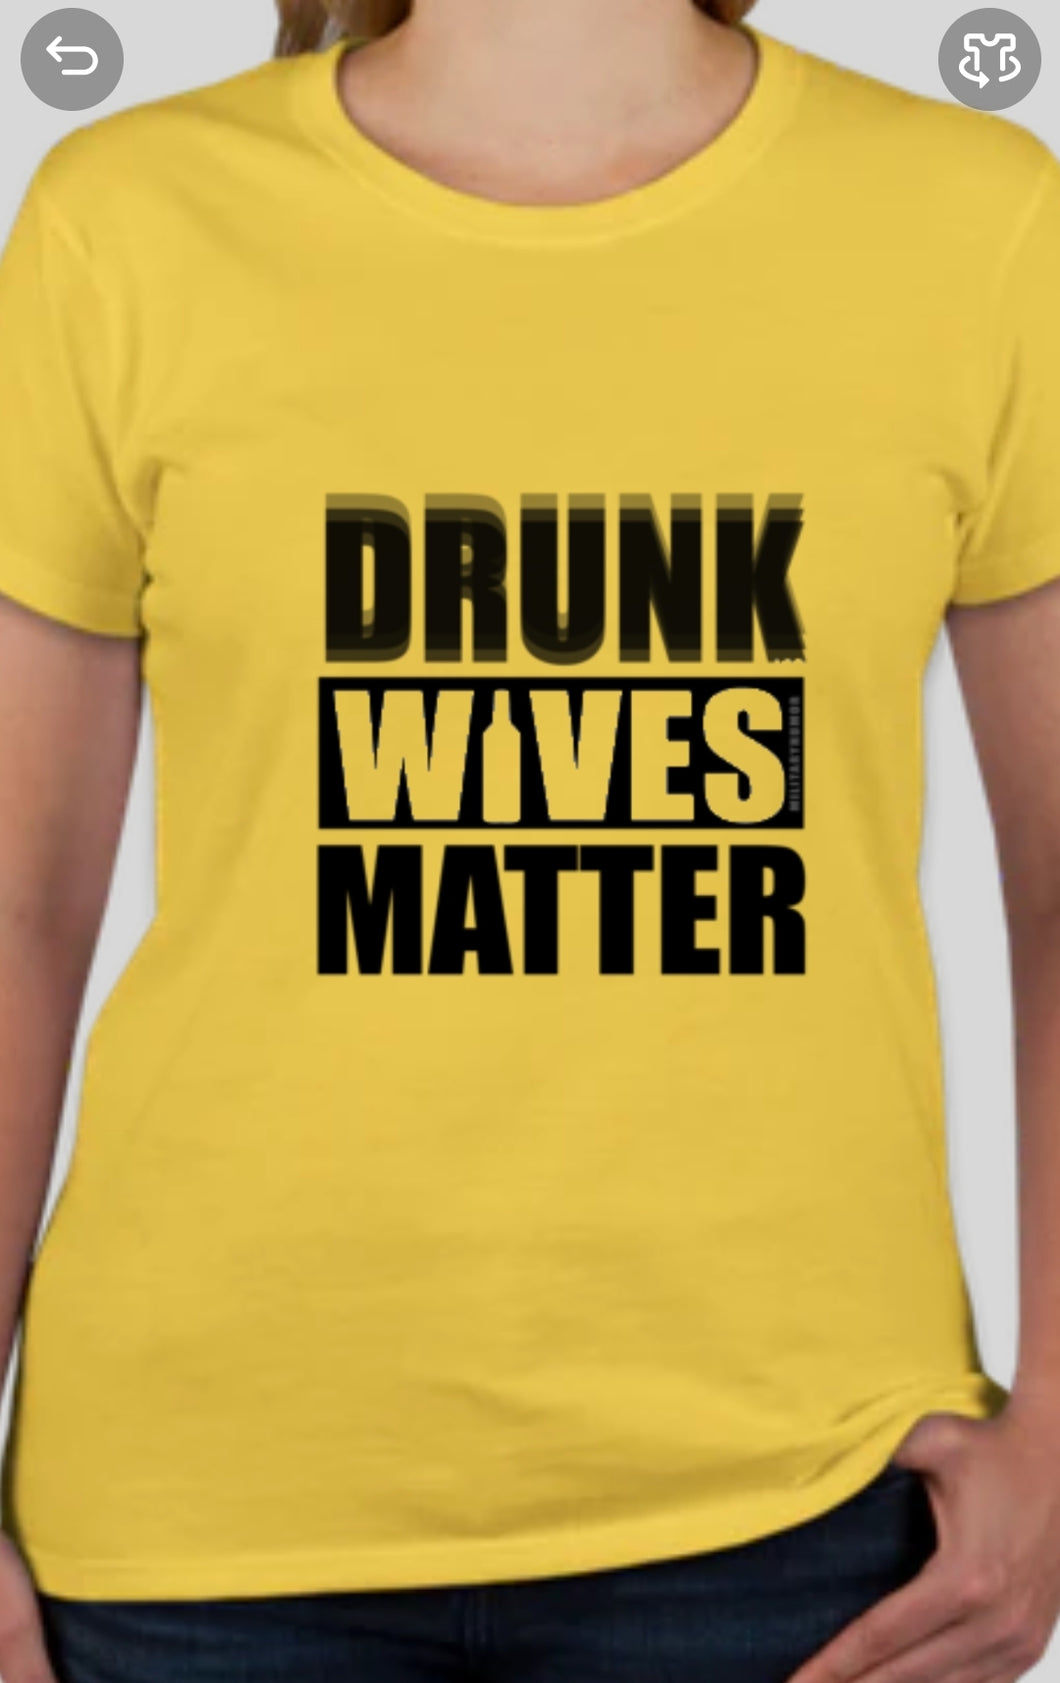 Military Humor - Drunk Wives Matter - Military Humor Stores